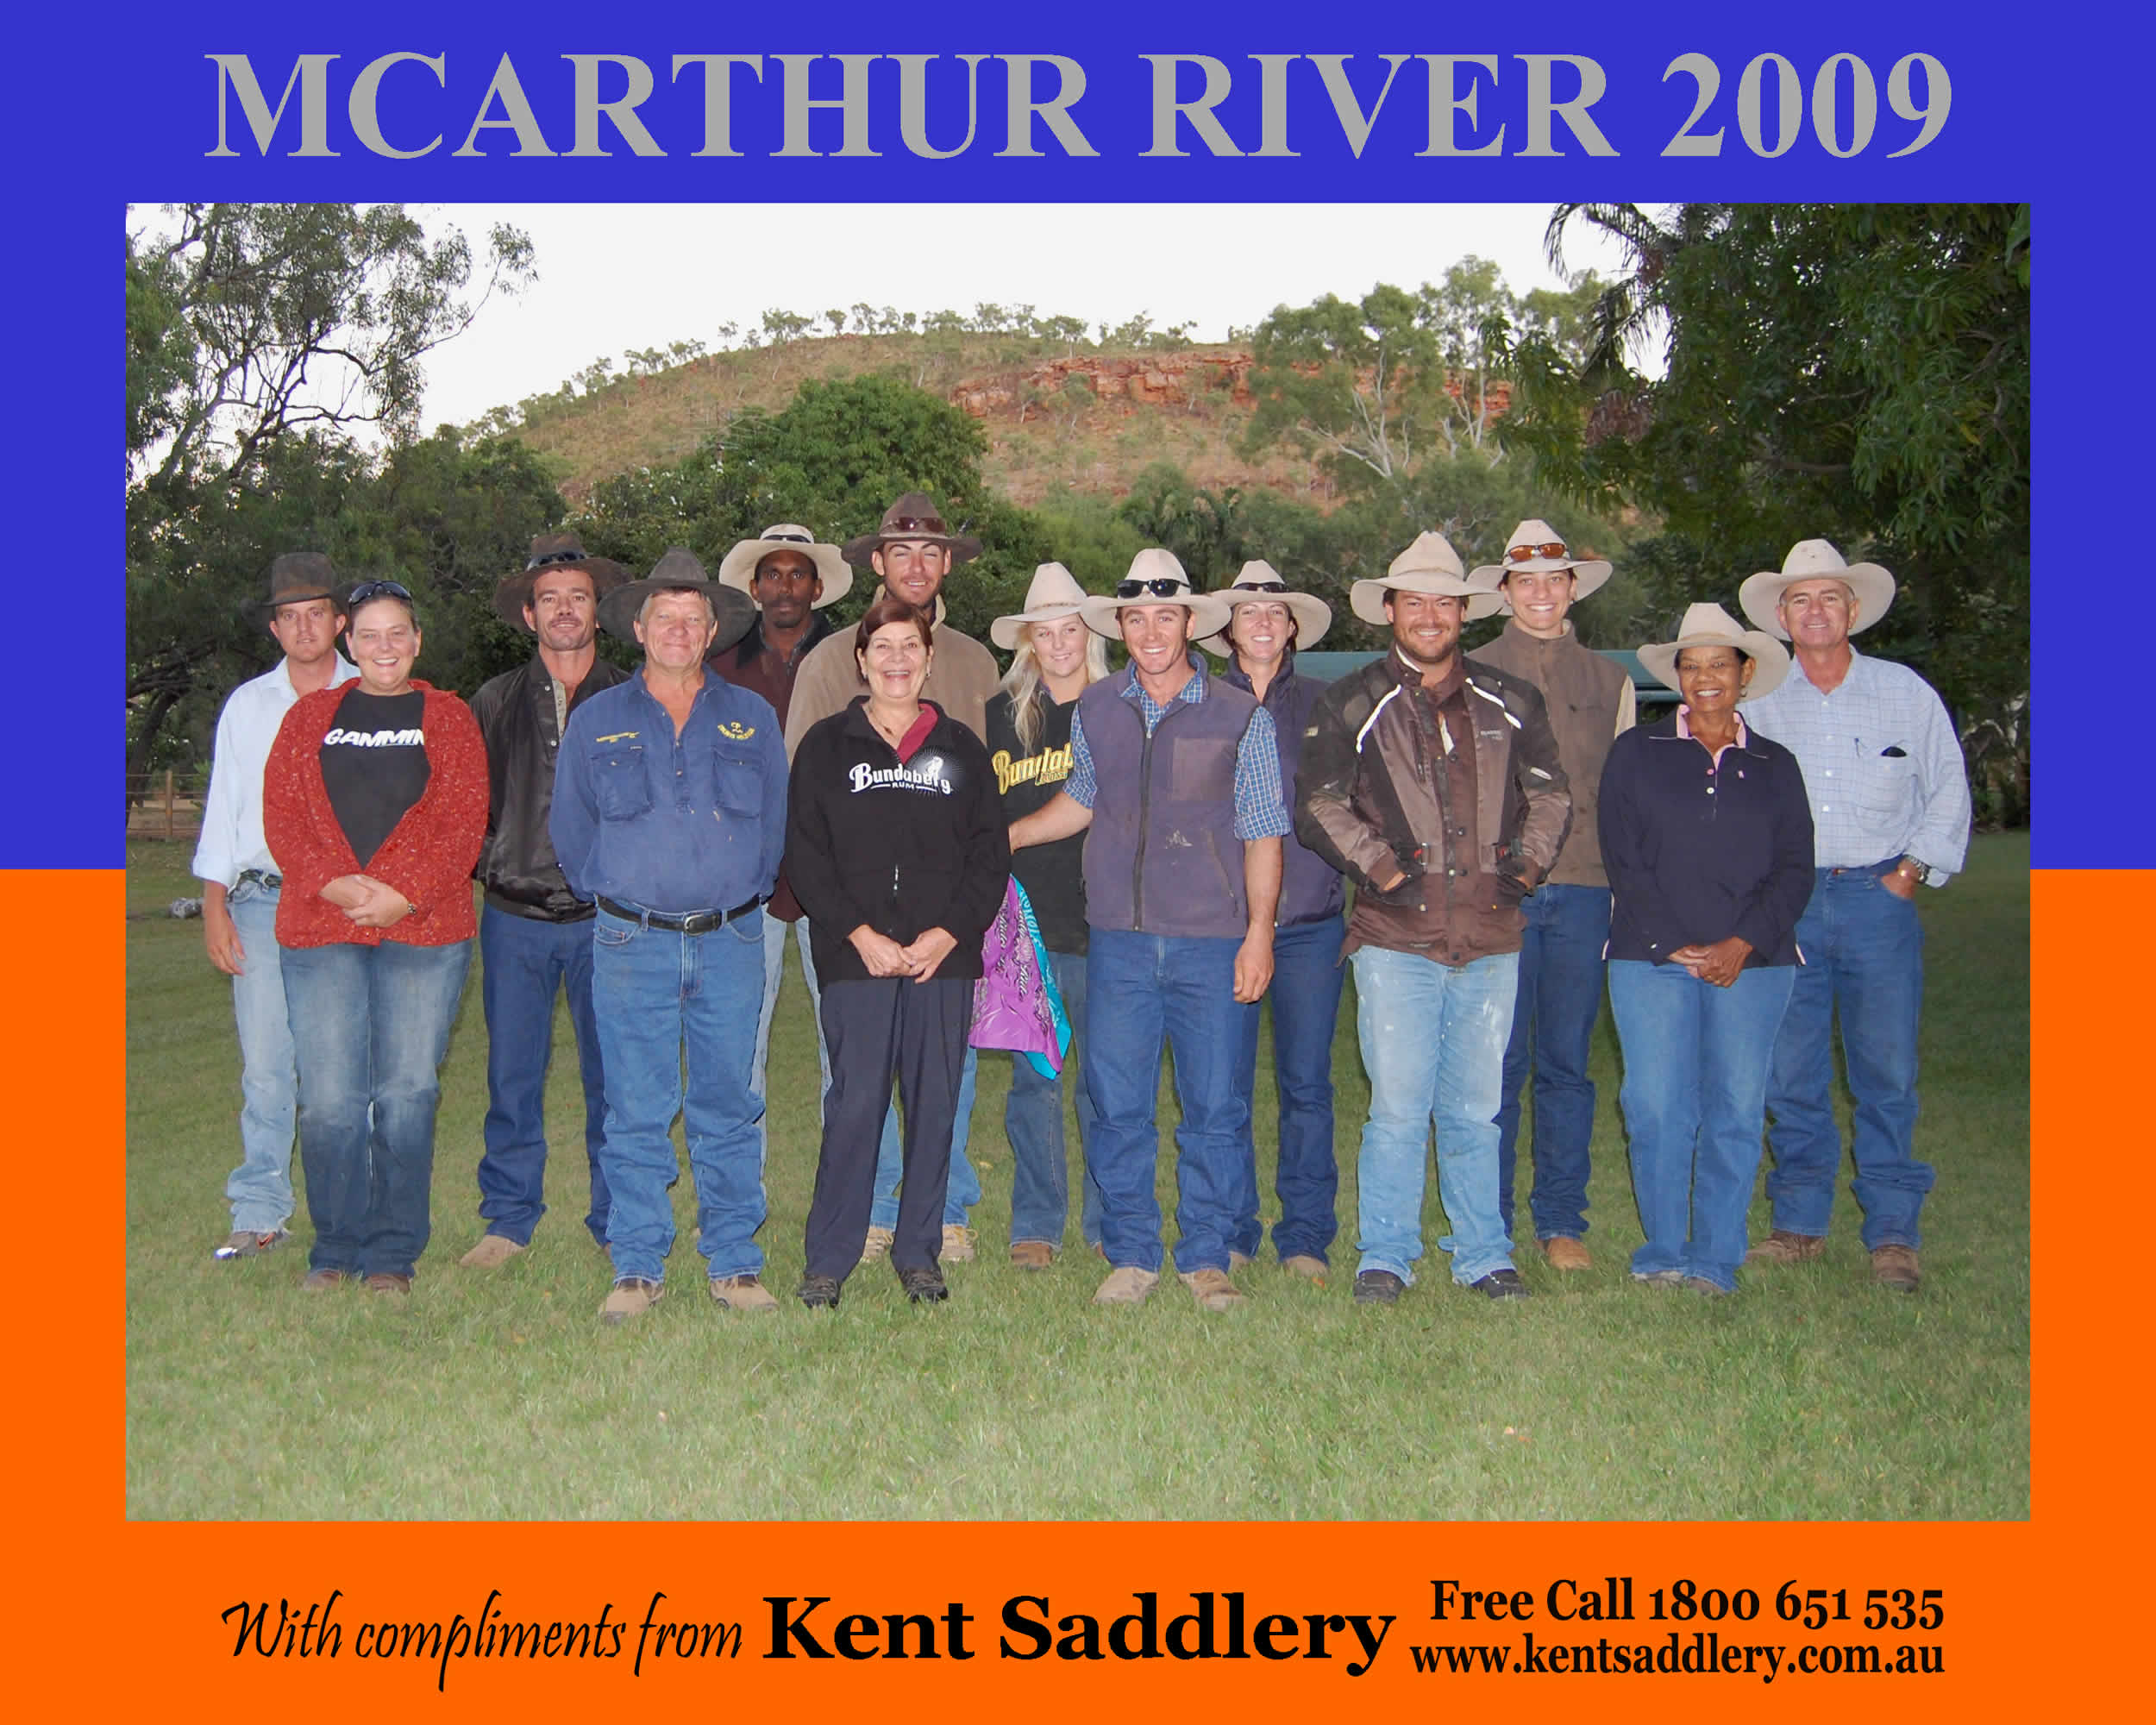 Northern Territory - McArthur River 21